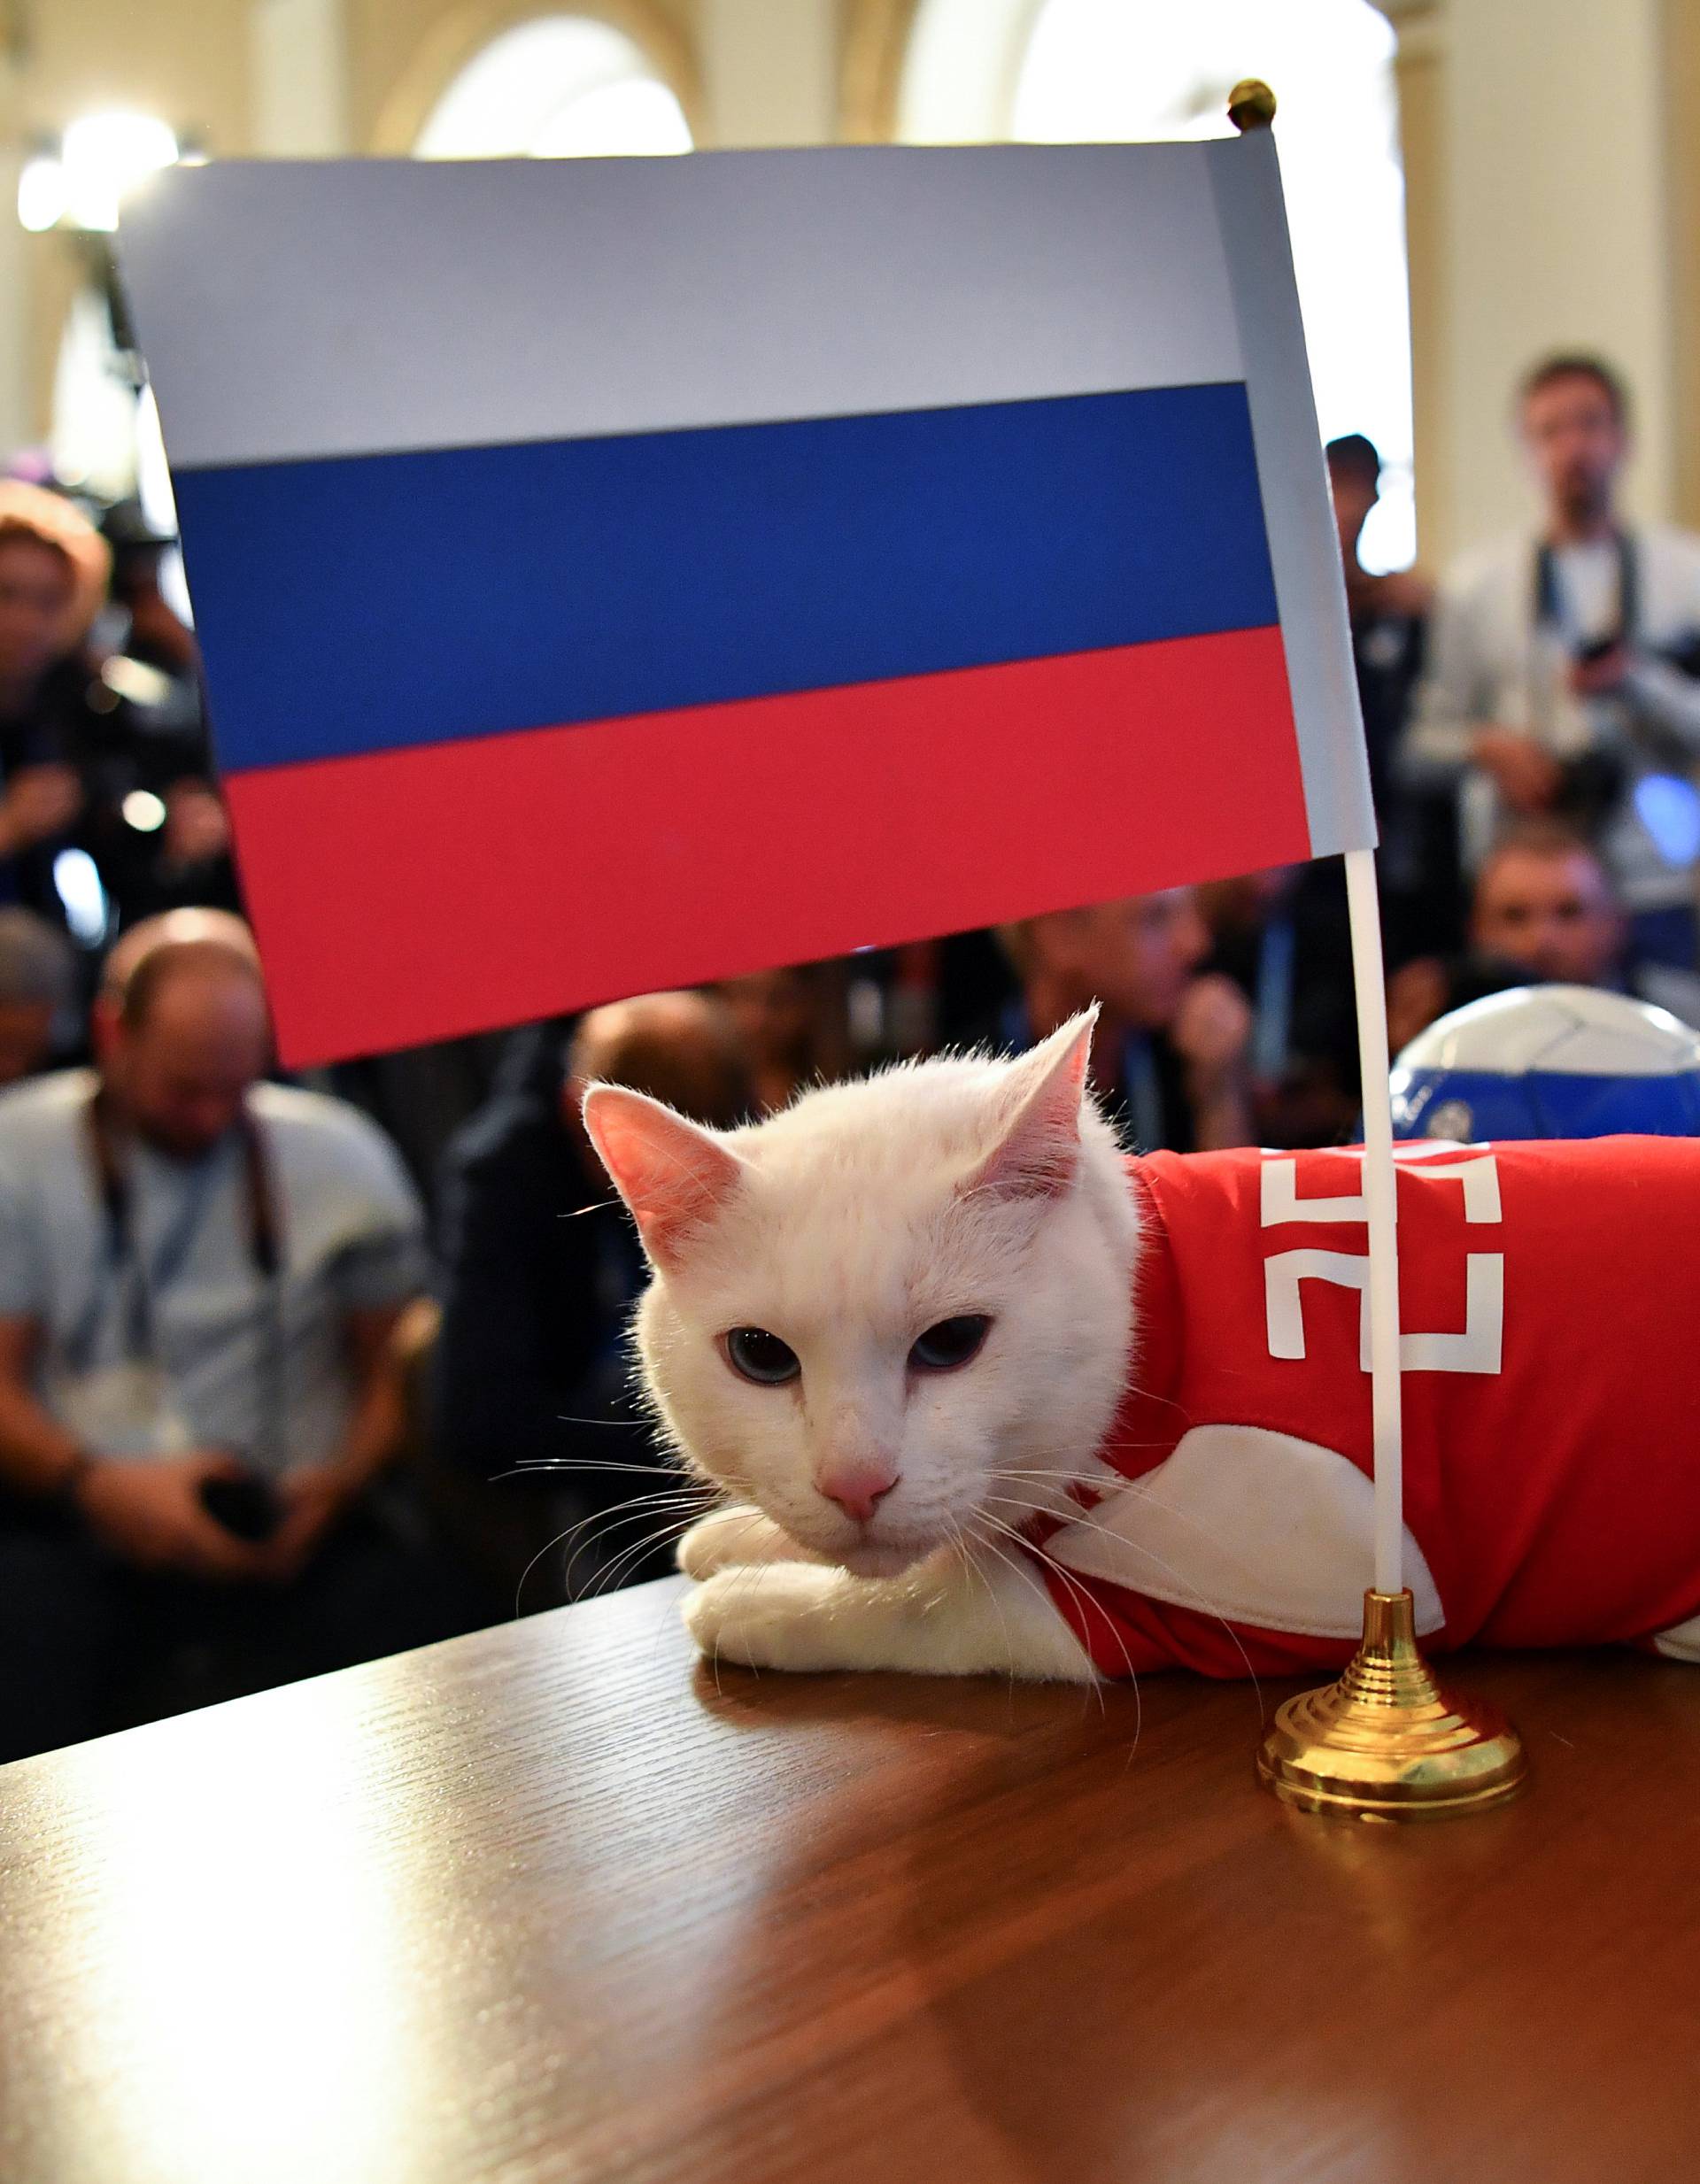 Cat Achilles attempts to predict the result of the opening match of the 2018 FIFA World Cup between Russia and Saudi Arabia in Saint Petersburg